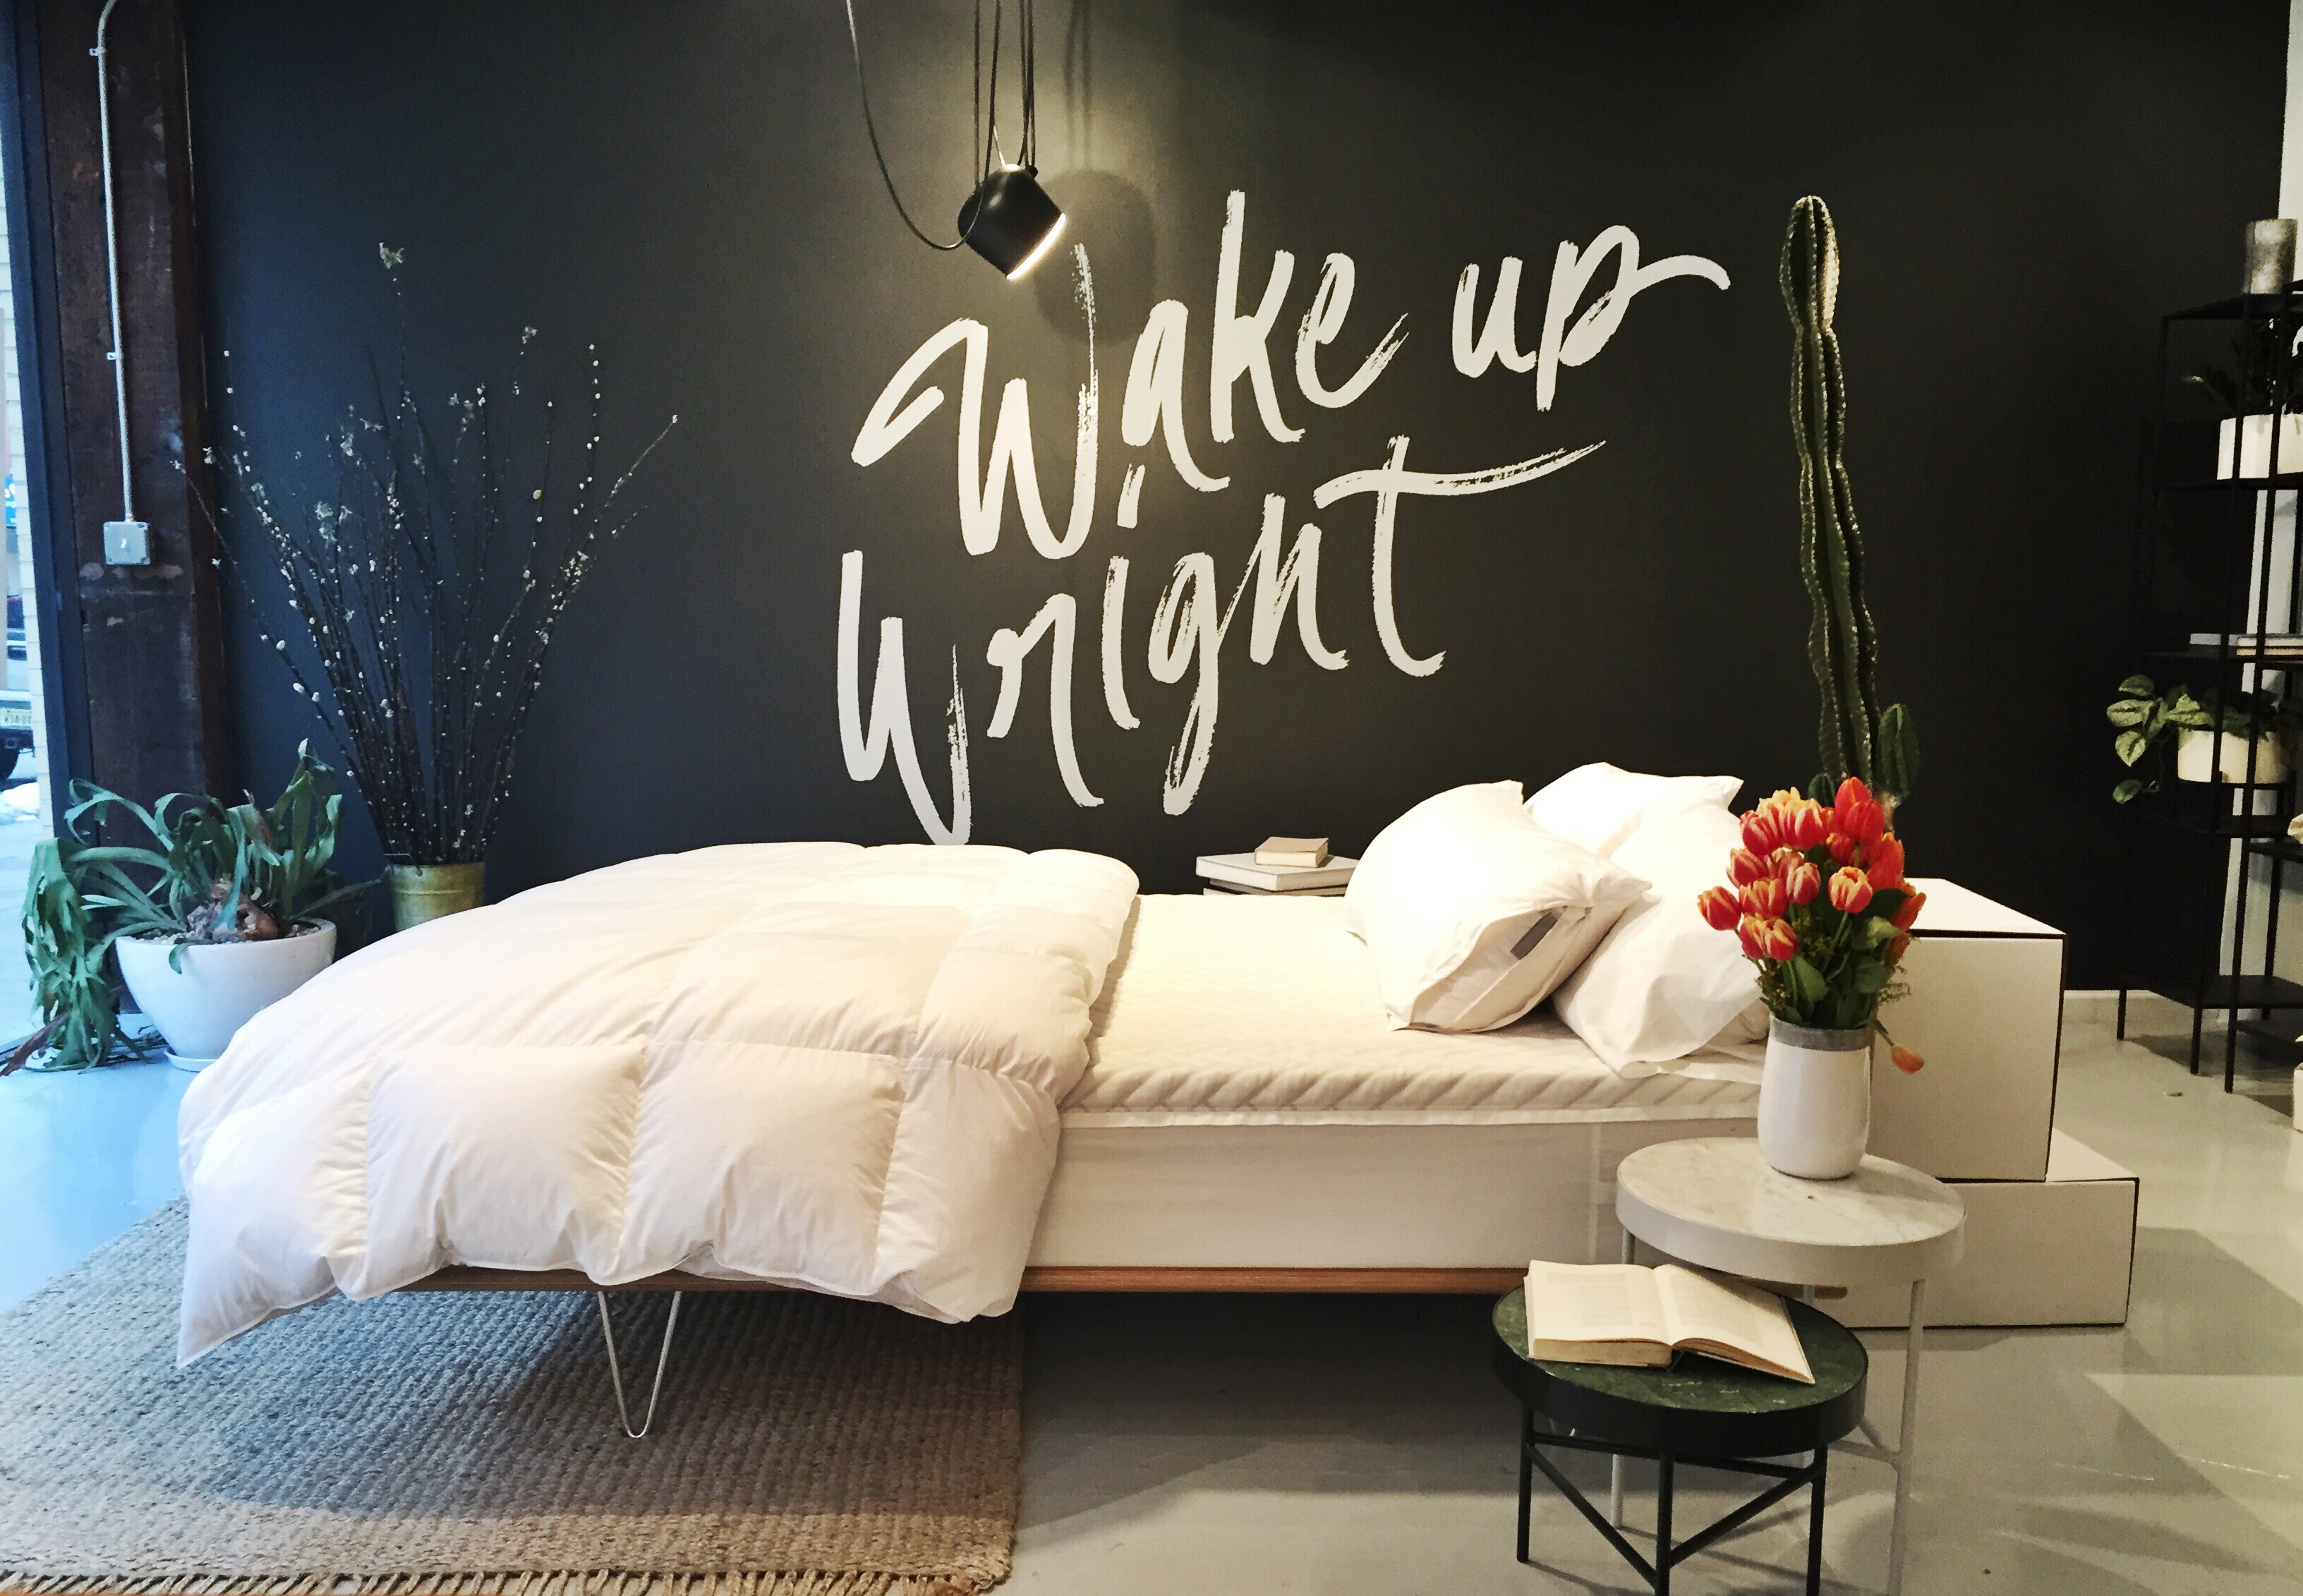 wright bedding made in america